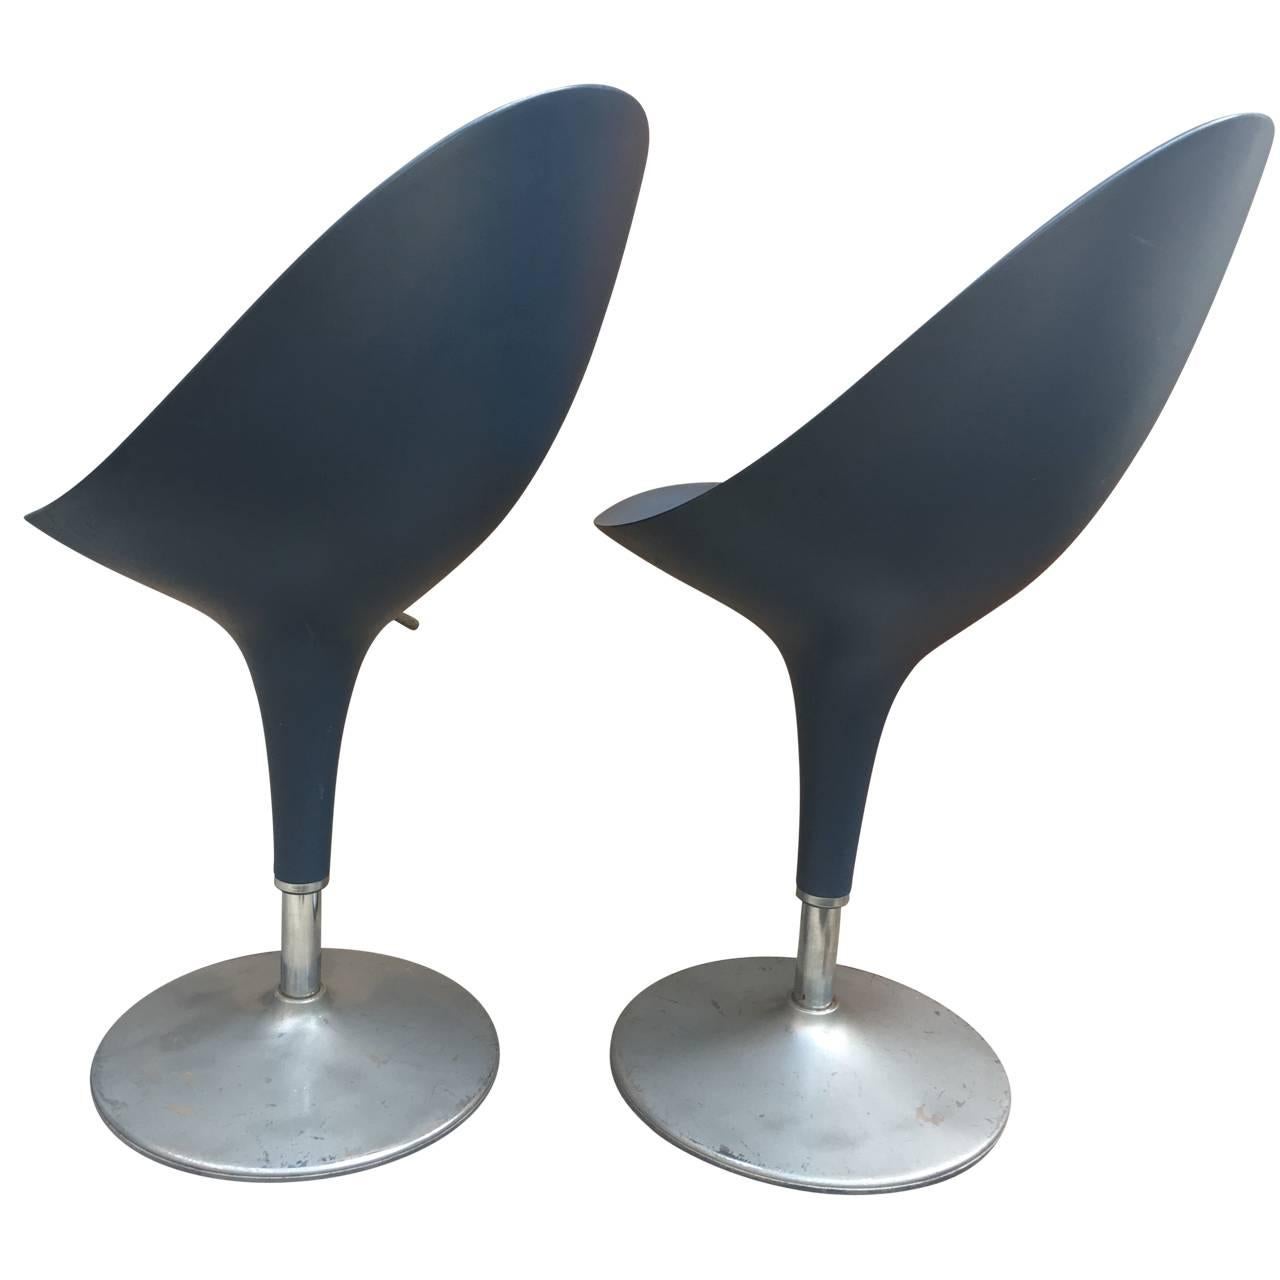 20th Century Pair of Modern Italian Chairs by Stefano Giovannoni